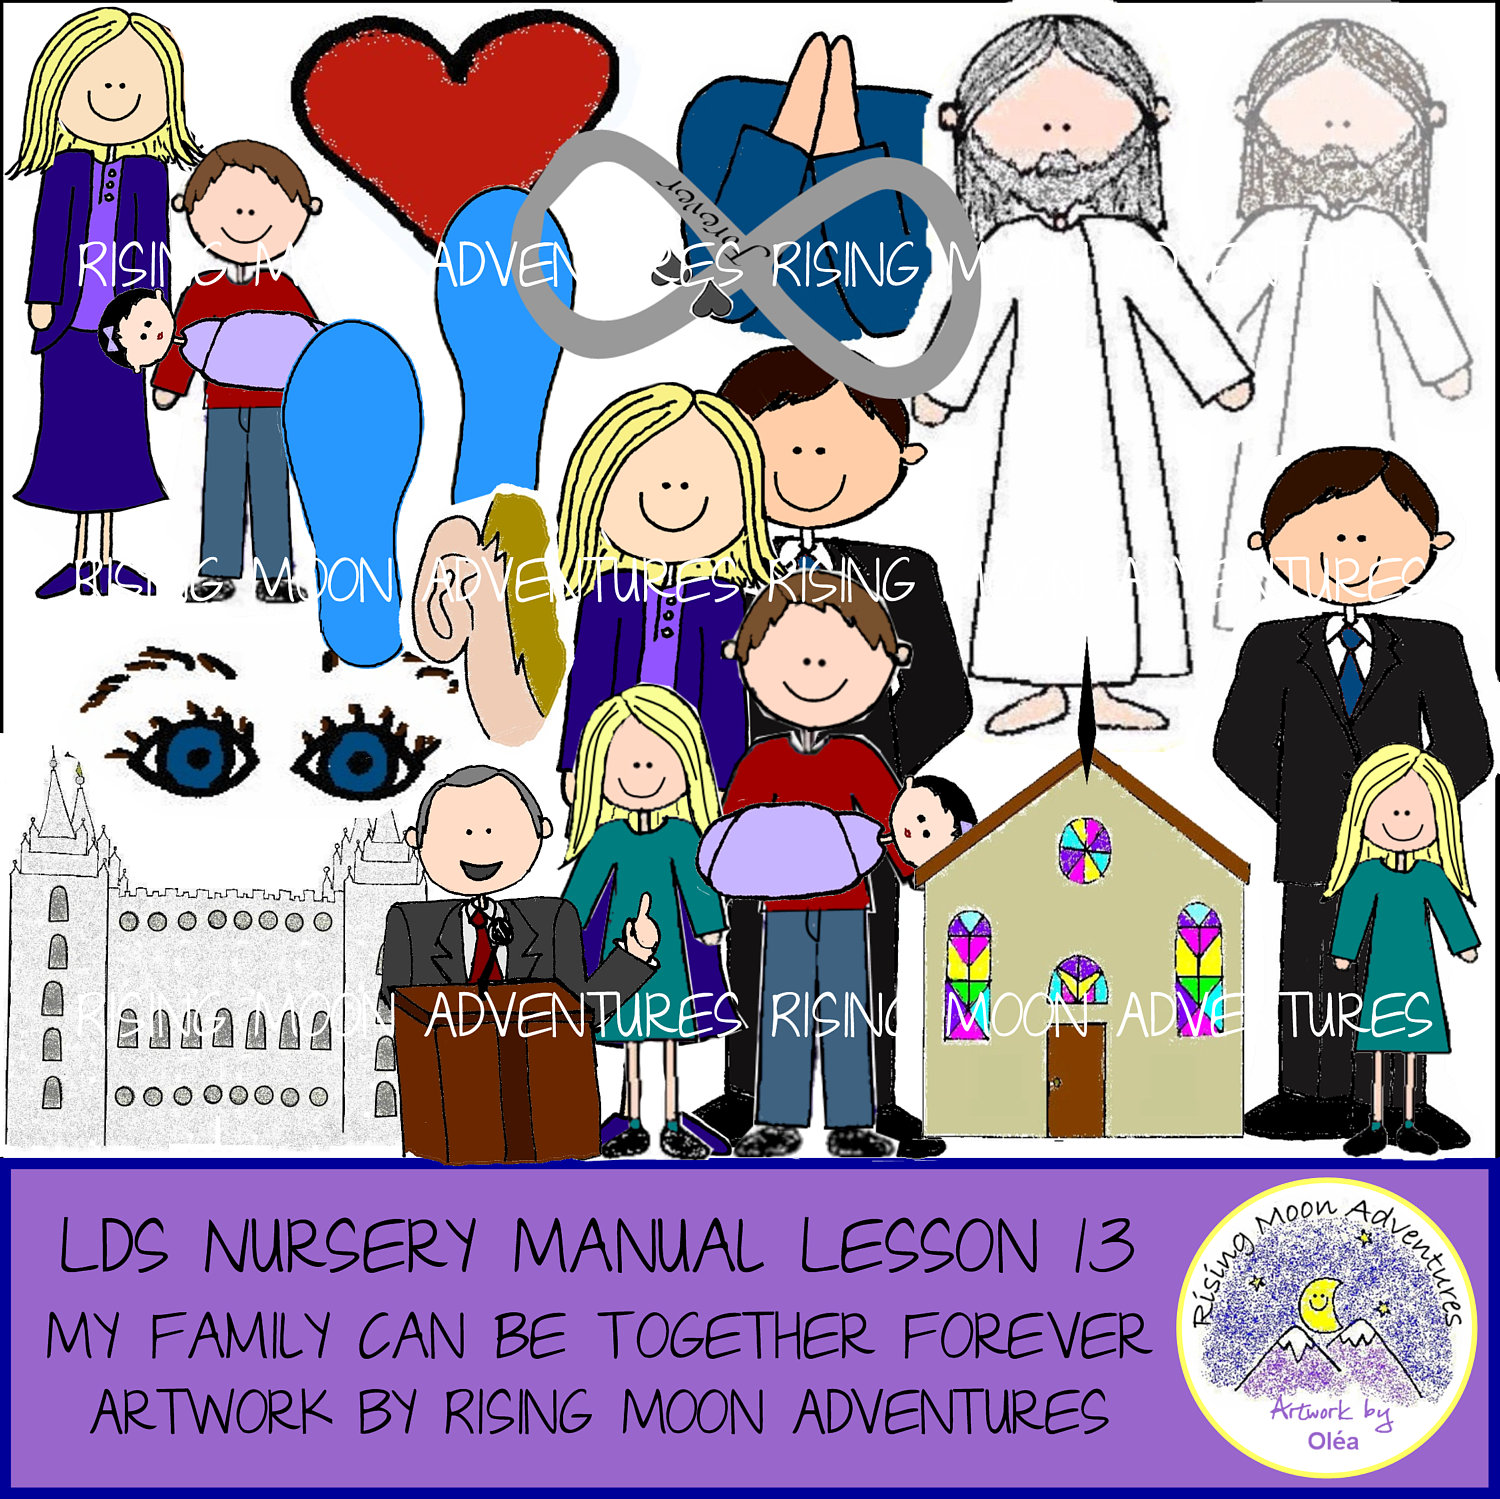 LDS Nursery Manual Lesson 13 My Family Can Be Together